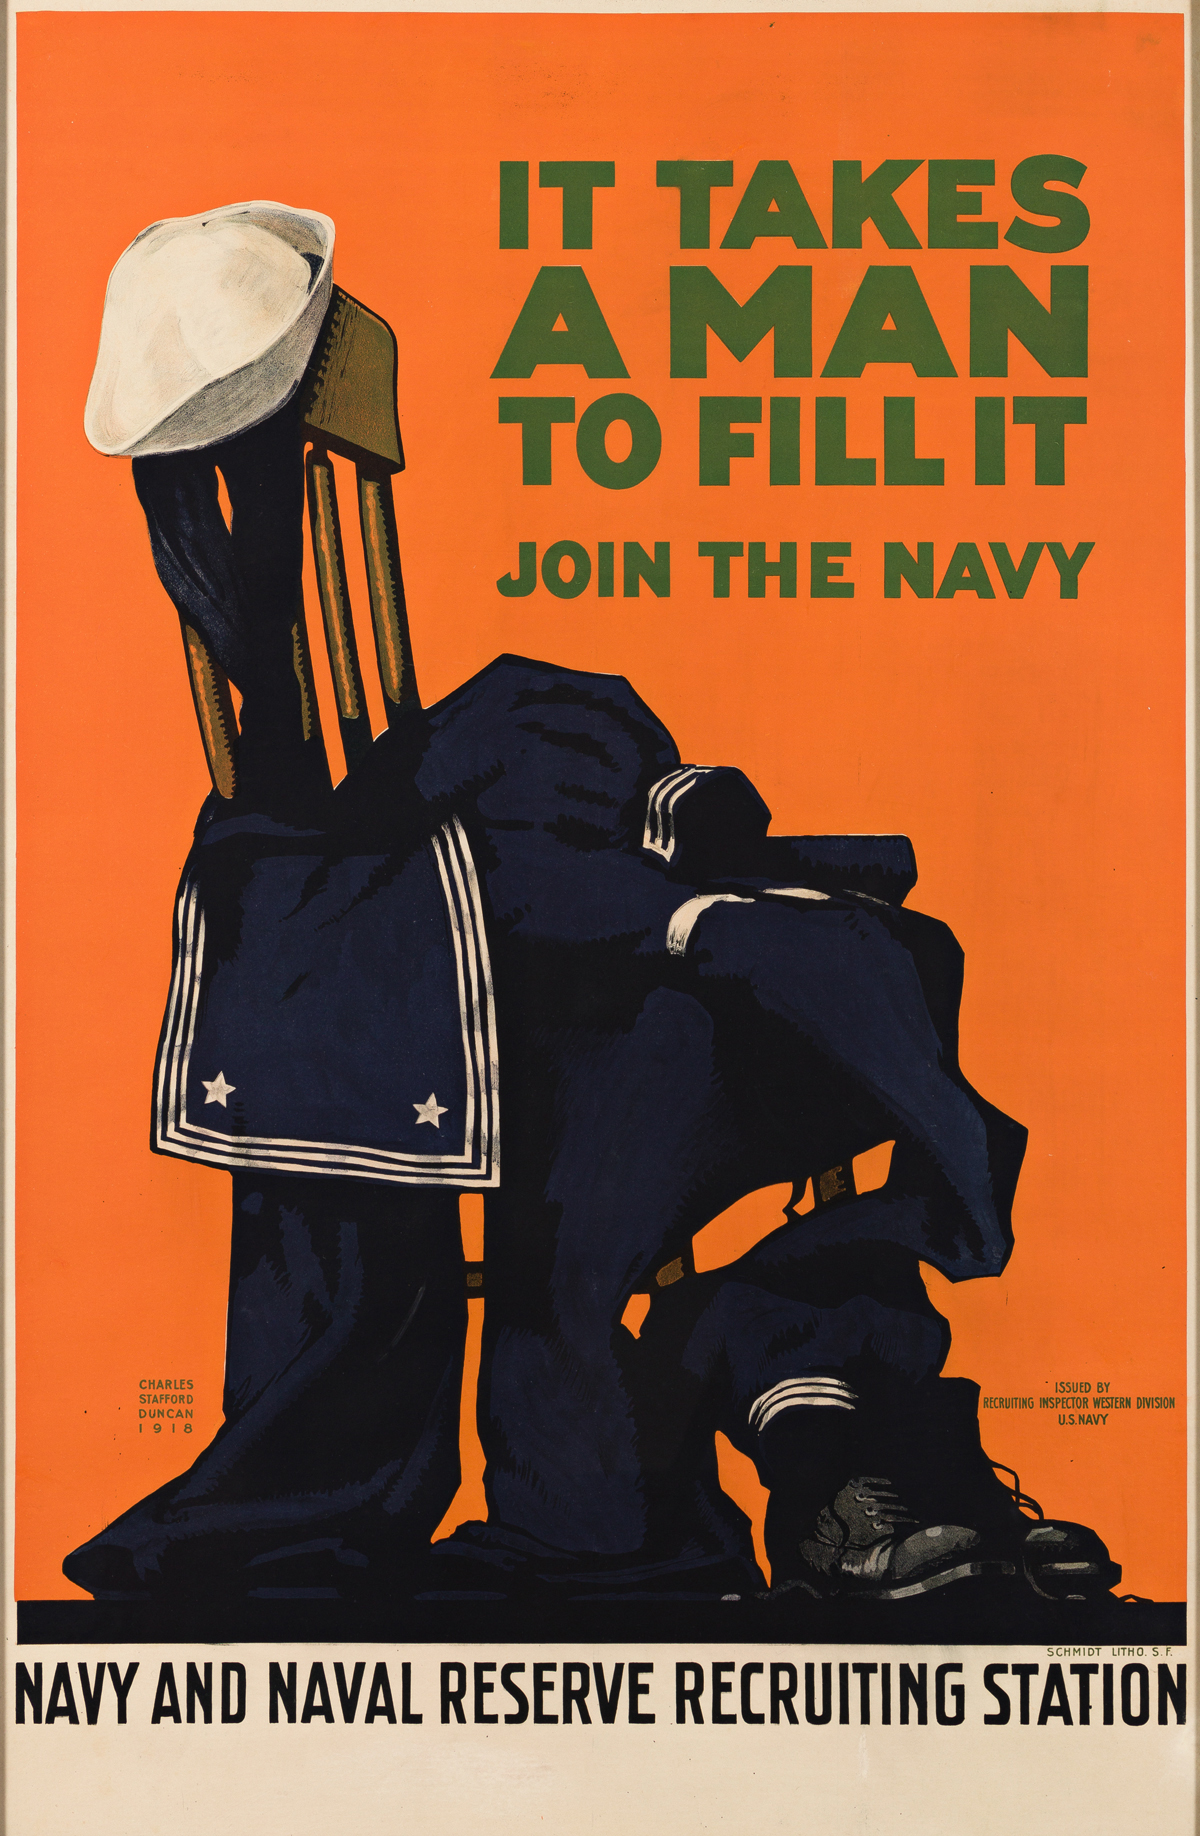 CHARLES STAFFORD DUNCAN (1892-1952).  IT TAKES A MAN TO FILL IT / JOIN THE NAVY. 1918. 40¾x26½ inches, 103½x67¼ cm. Schmidt Litho., San